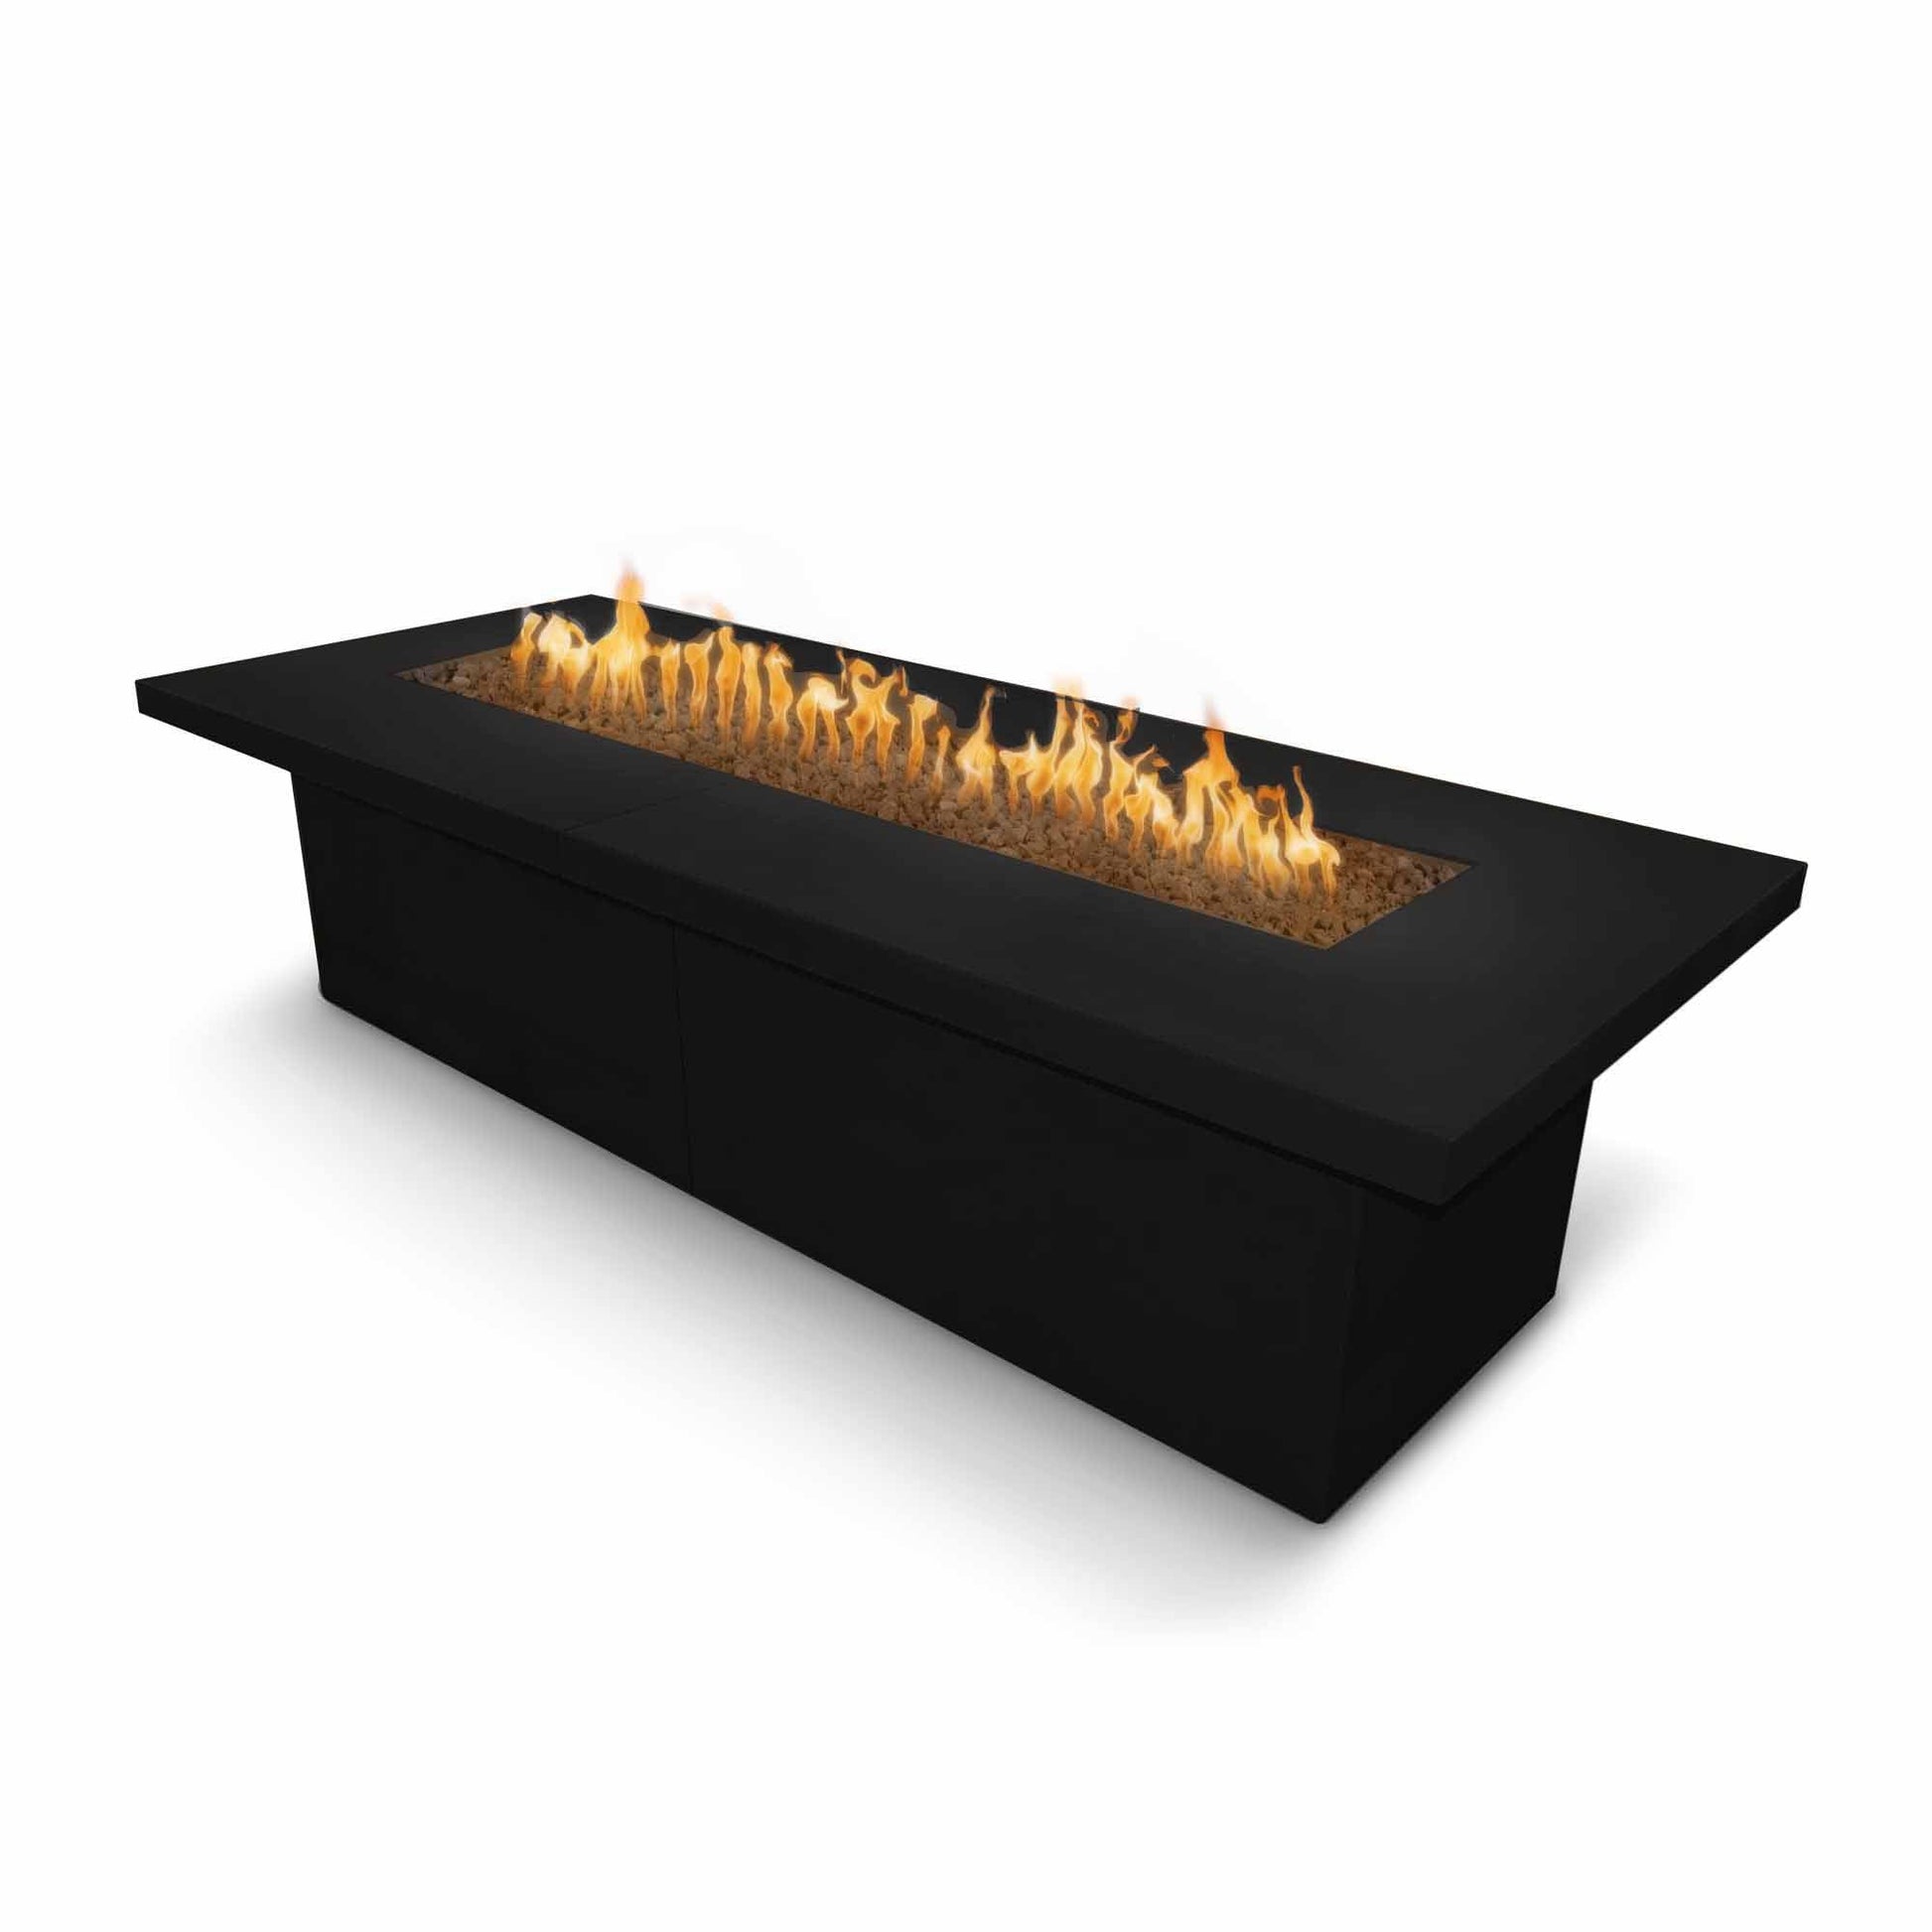 The Outdoor Plus Rectangular Newport 144" Hammered Copper Liquid Propane Fire Pit with Match Lit with Flame Sense Ignition